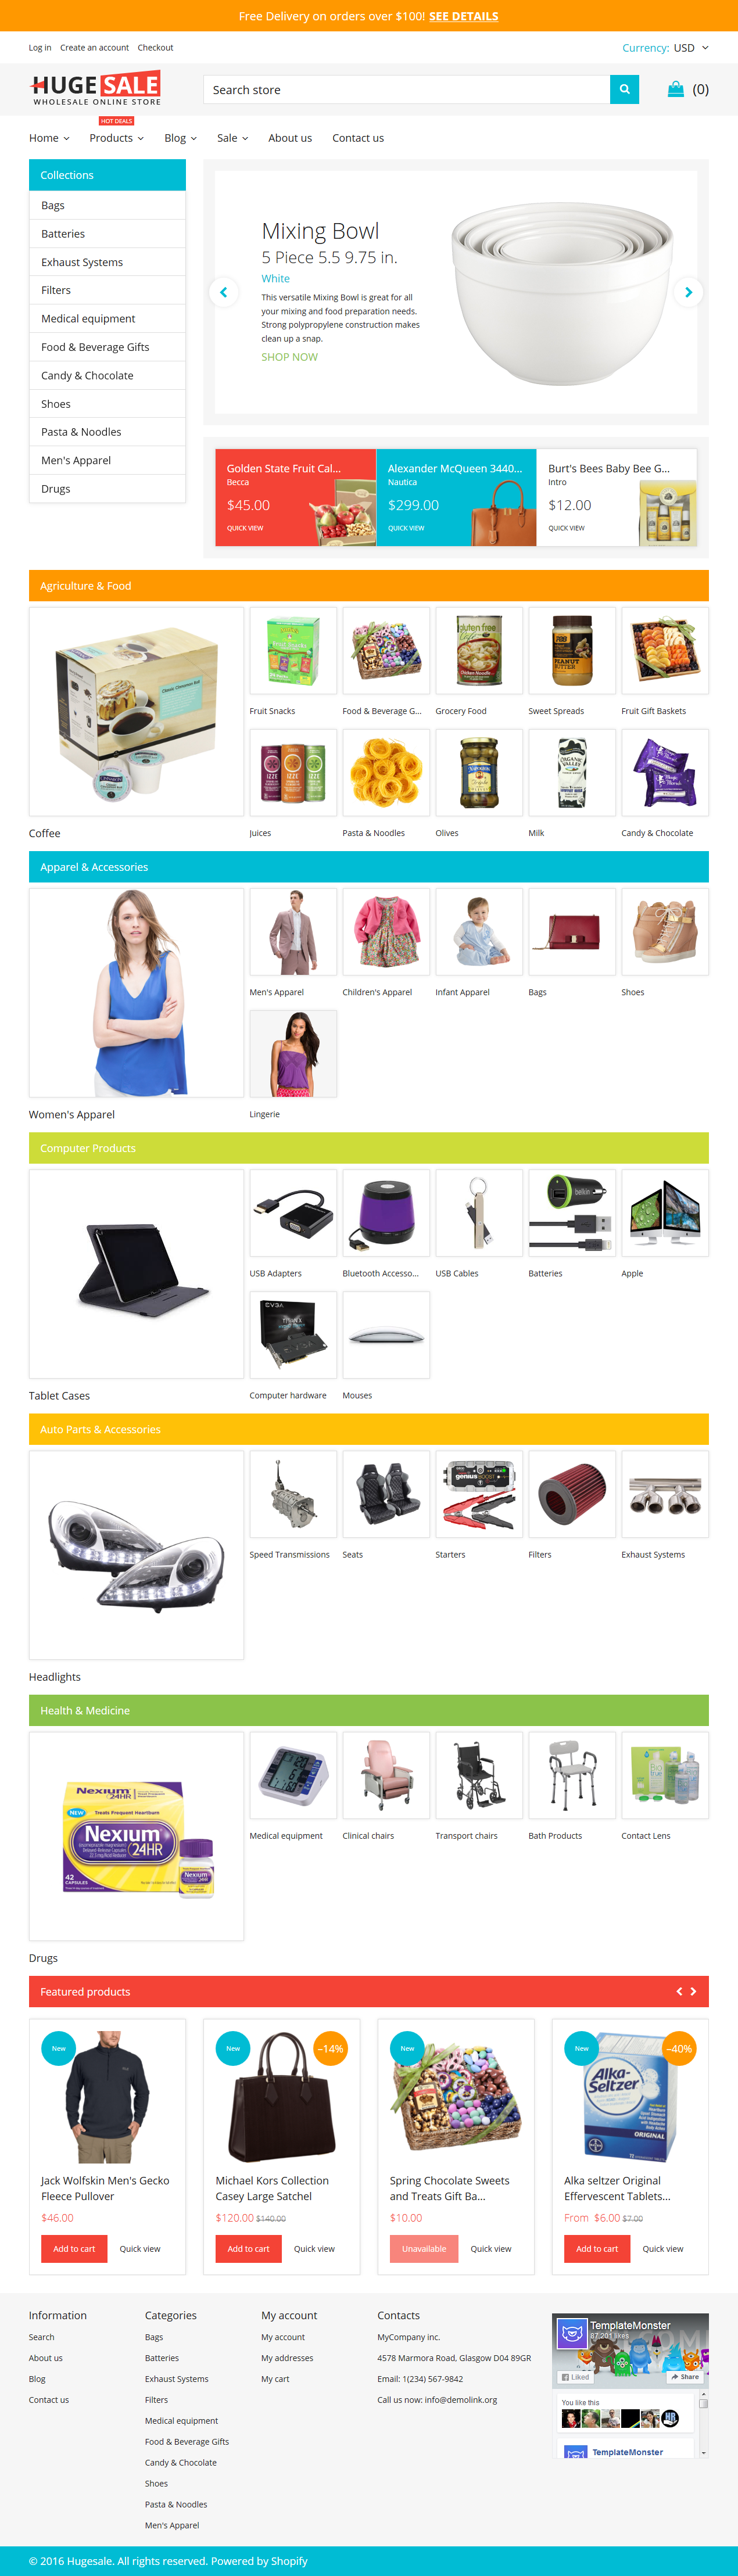 Top SHOPIFY Theme for large inventory Stores - Huge Sale Shopify Theme